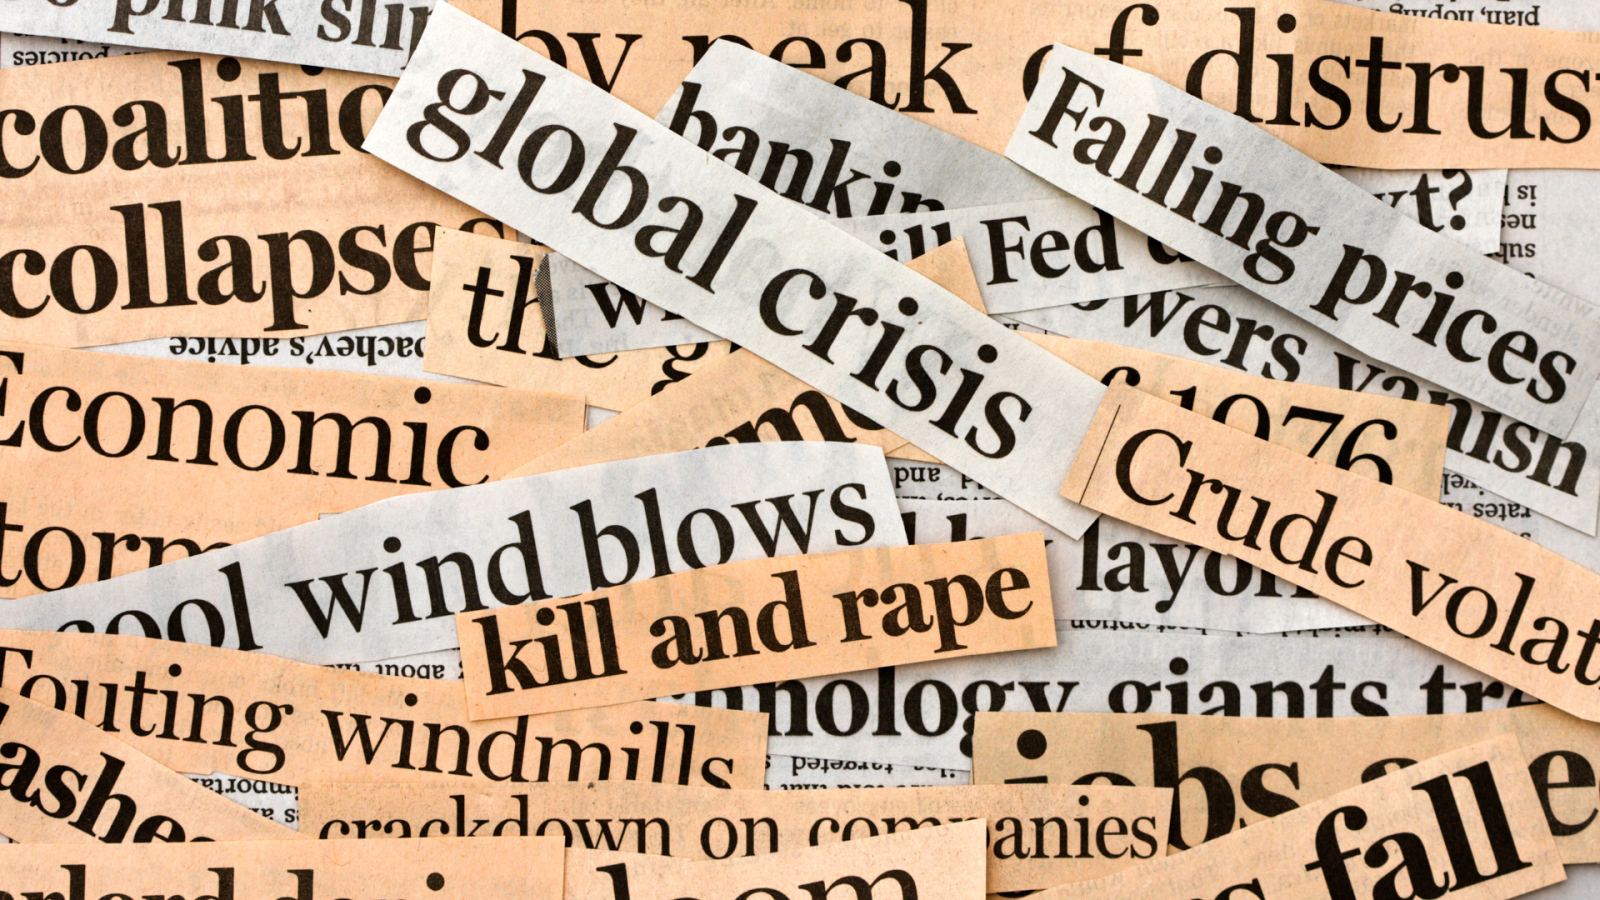 Close-up photograph of newspaper headline clippings overlaid on top of eachother. Some of the phrases read 'global crisis', 'falling prices', 'kill and rape', 'collapse'.